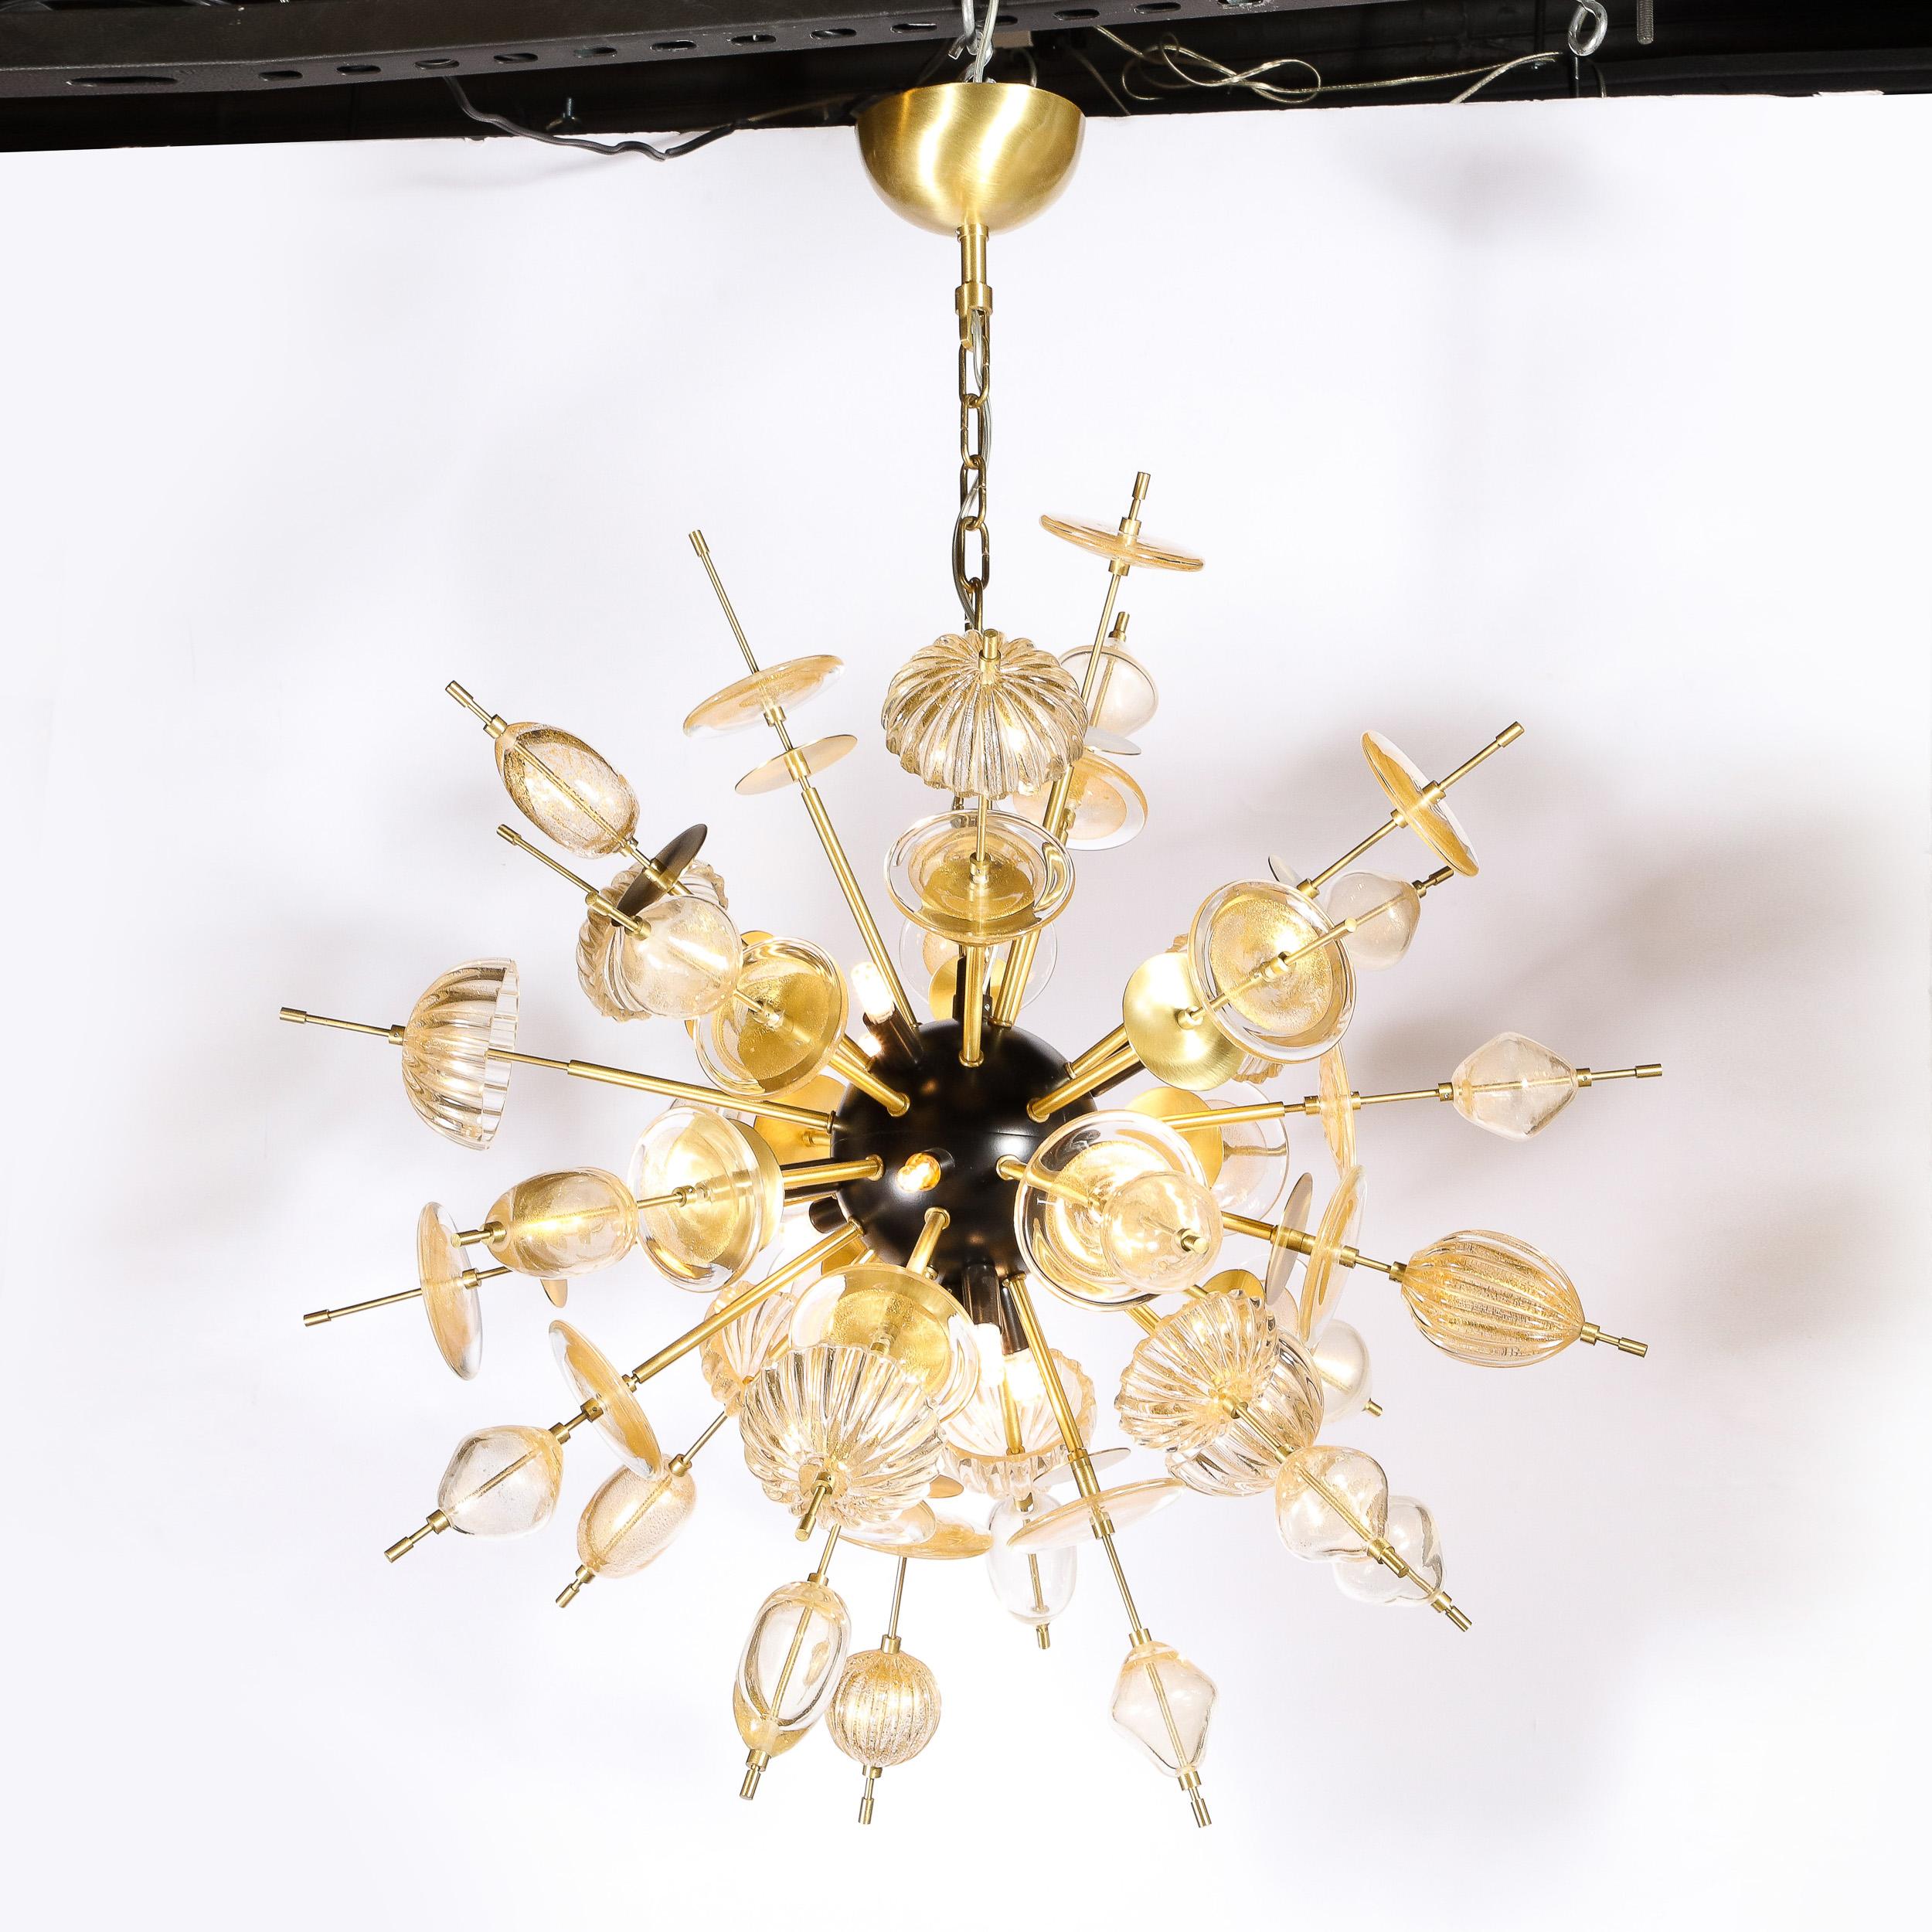 Modernist Brass & Enamel Sputnik Chandelier, Clear & Gold Handblown Murano Glass In Excellent Condition For Sale In New York, NY